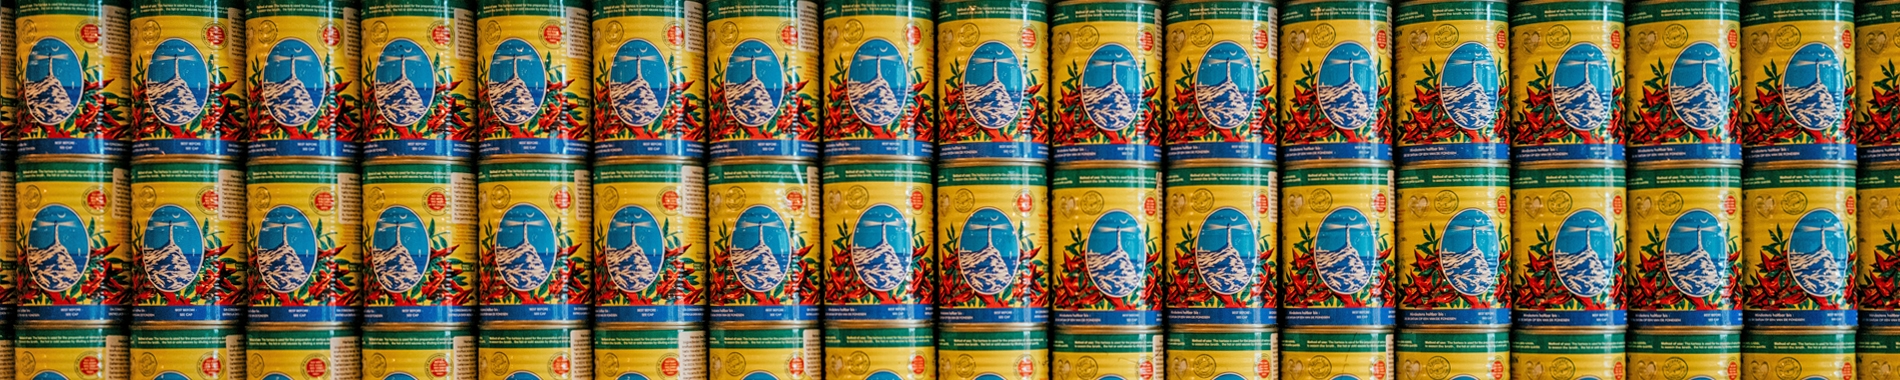 Decorative image featuring stacked cans